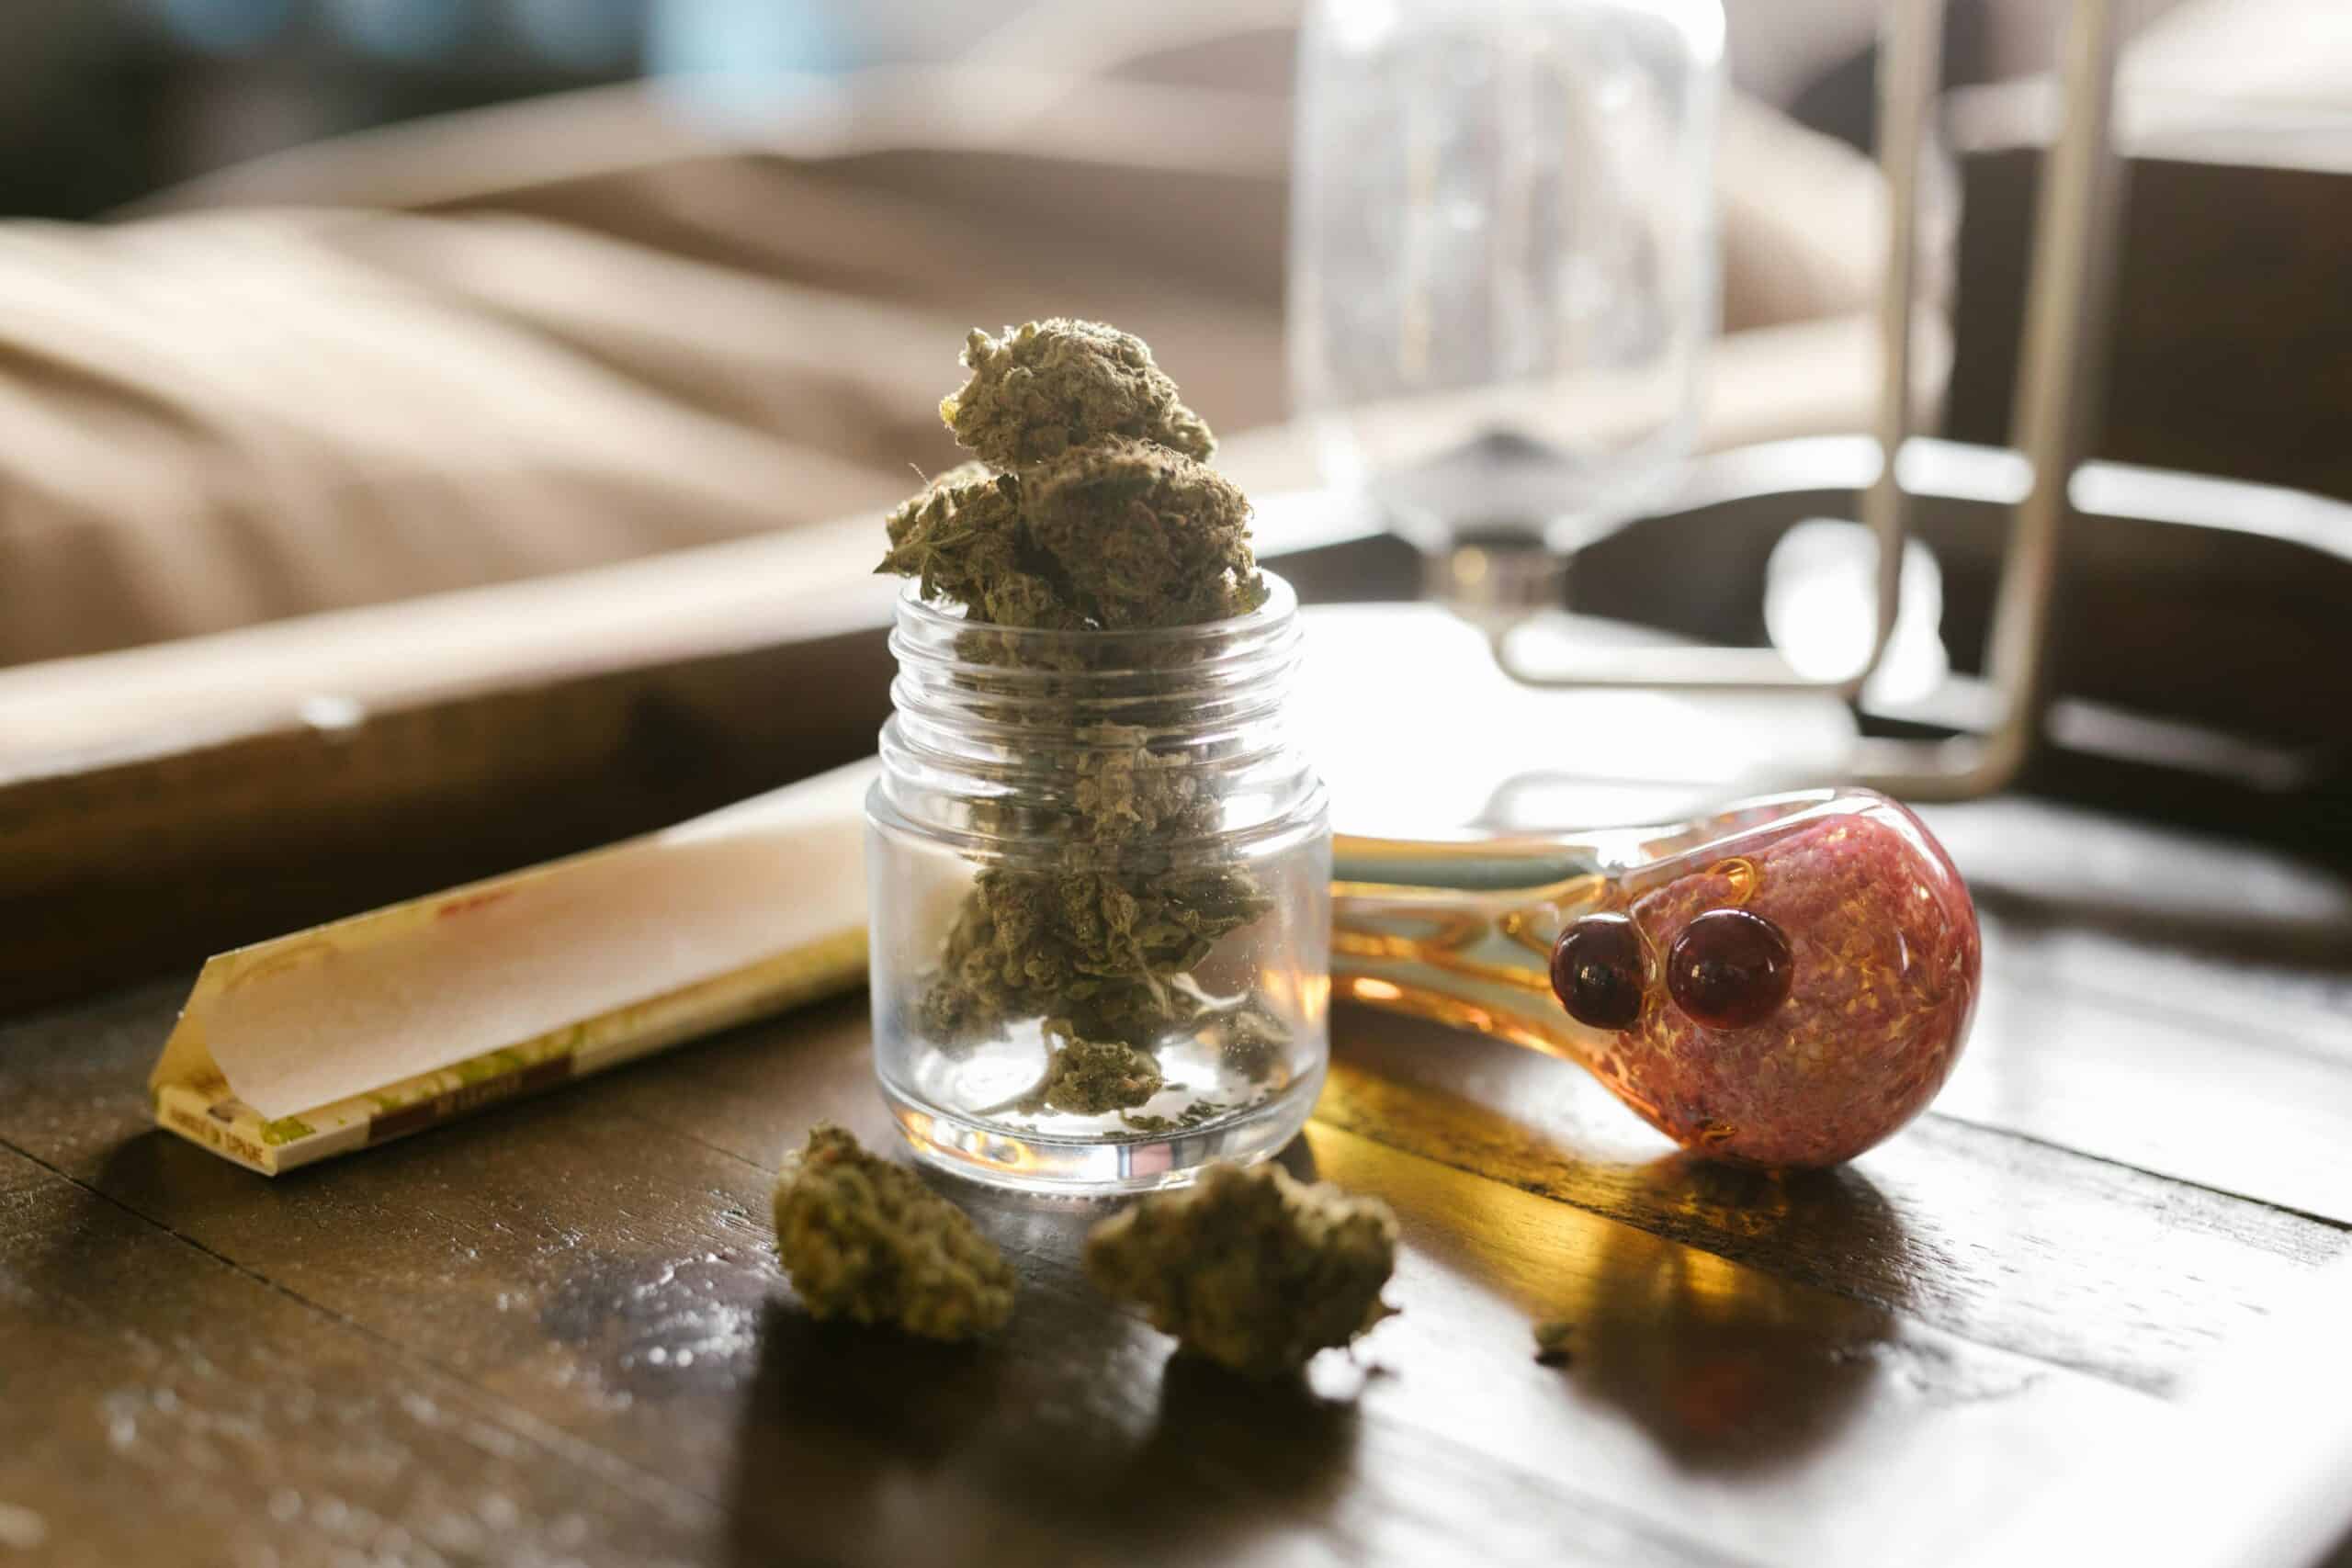 DIY Weed Pipes: Safe & Simple Guide for First-Timers